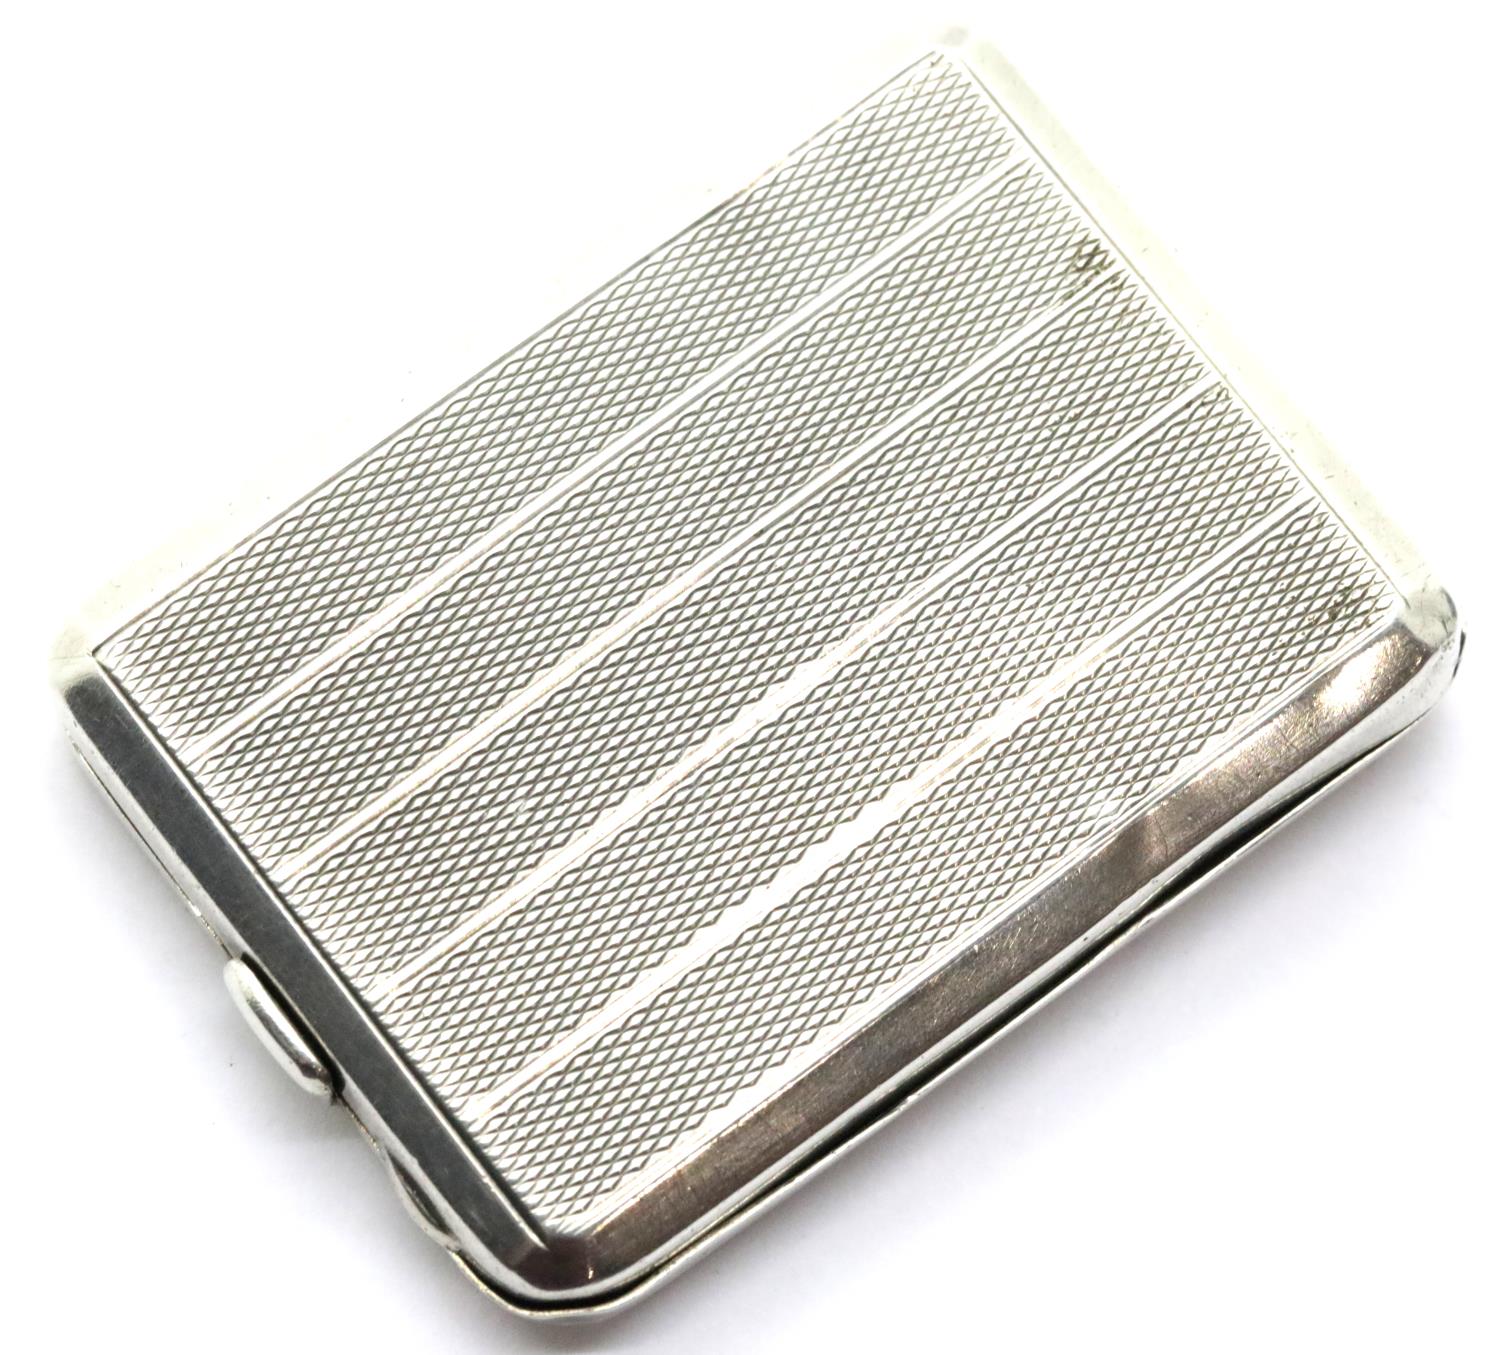 Hallmarked silver vesta case, 4 x 5 cm, 35g. P&P Group 1 (£14+VAT for the first lot and £1+VAT for